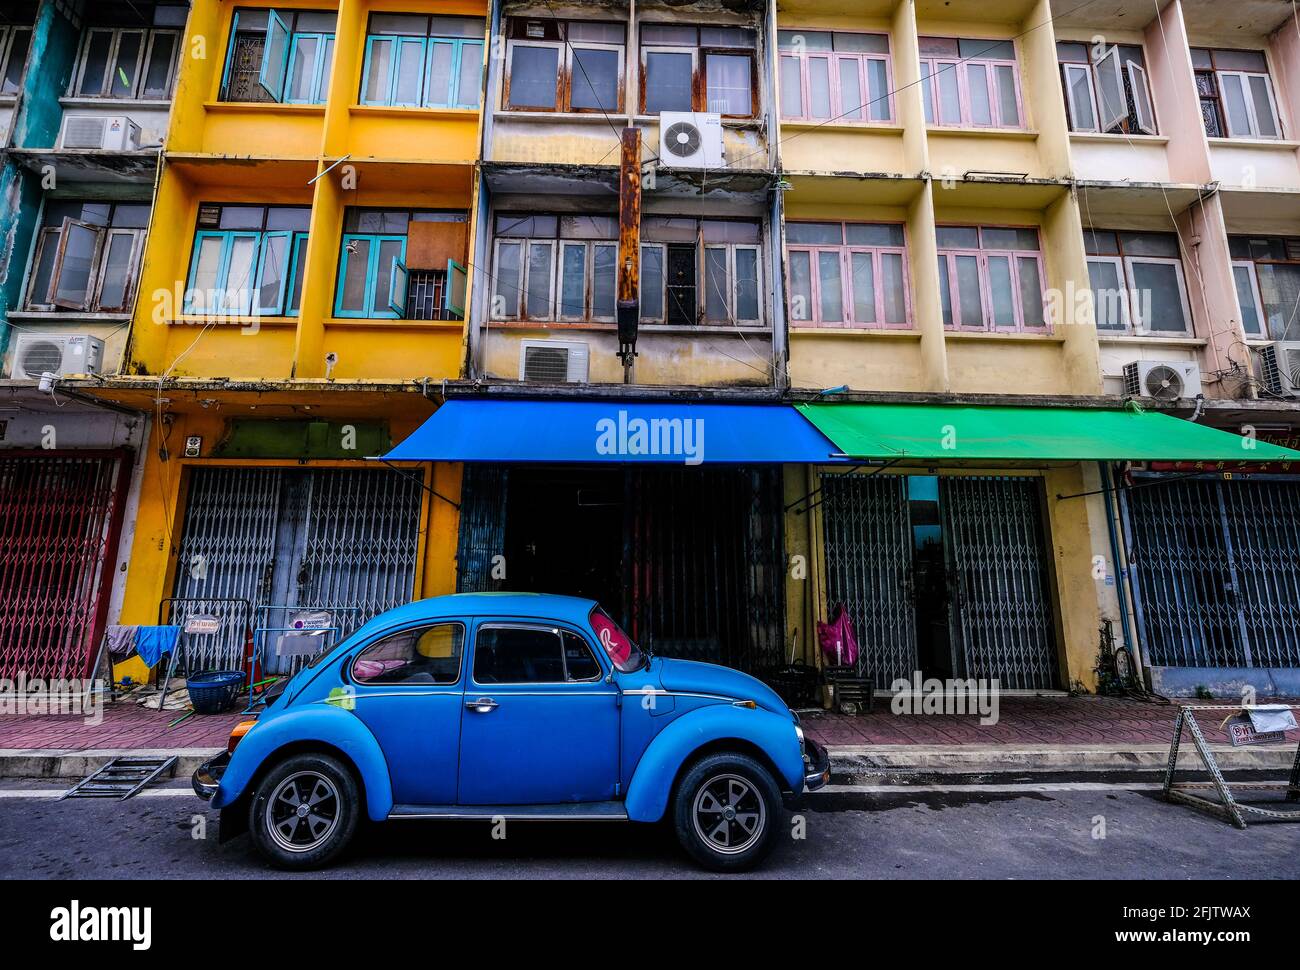 An old blue VW Beetle is parked in the street in front of a row of colorful buildings in the Chinatown area of Bangkok, Thailand Stock Photo